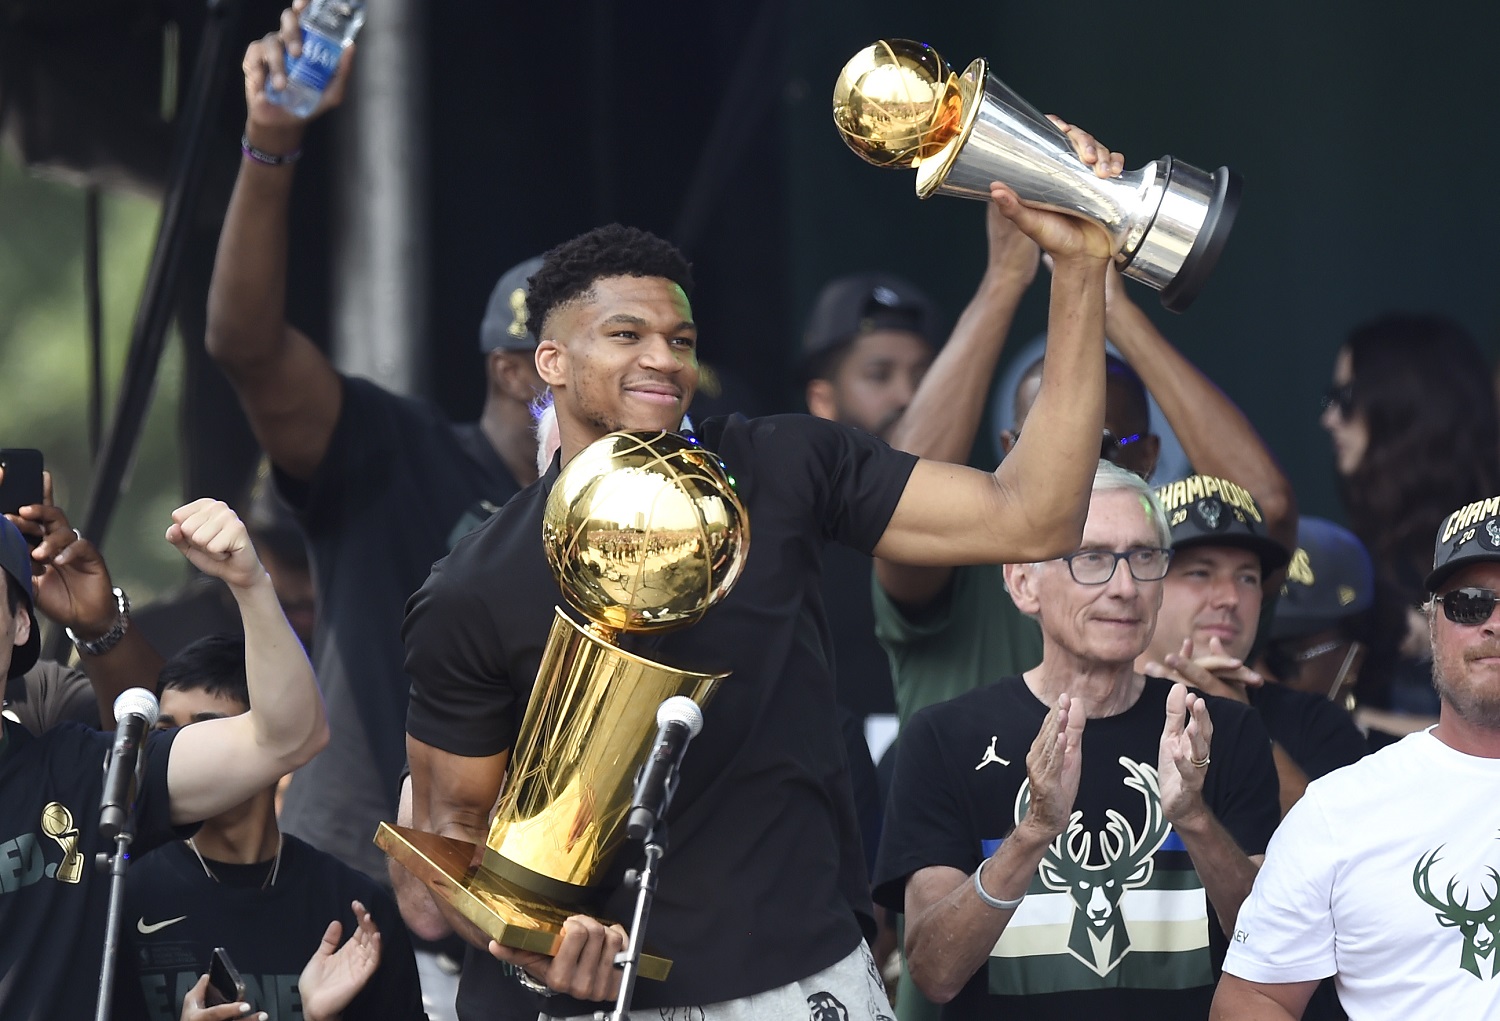 Giannis Antetokounmpo celebrates with the Larry O'Brien Trophy during the Milwaukee Bucks' victory parade and rally. | Patrick McDermott/Getty Images